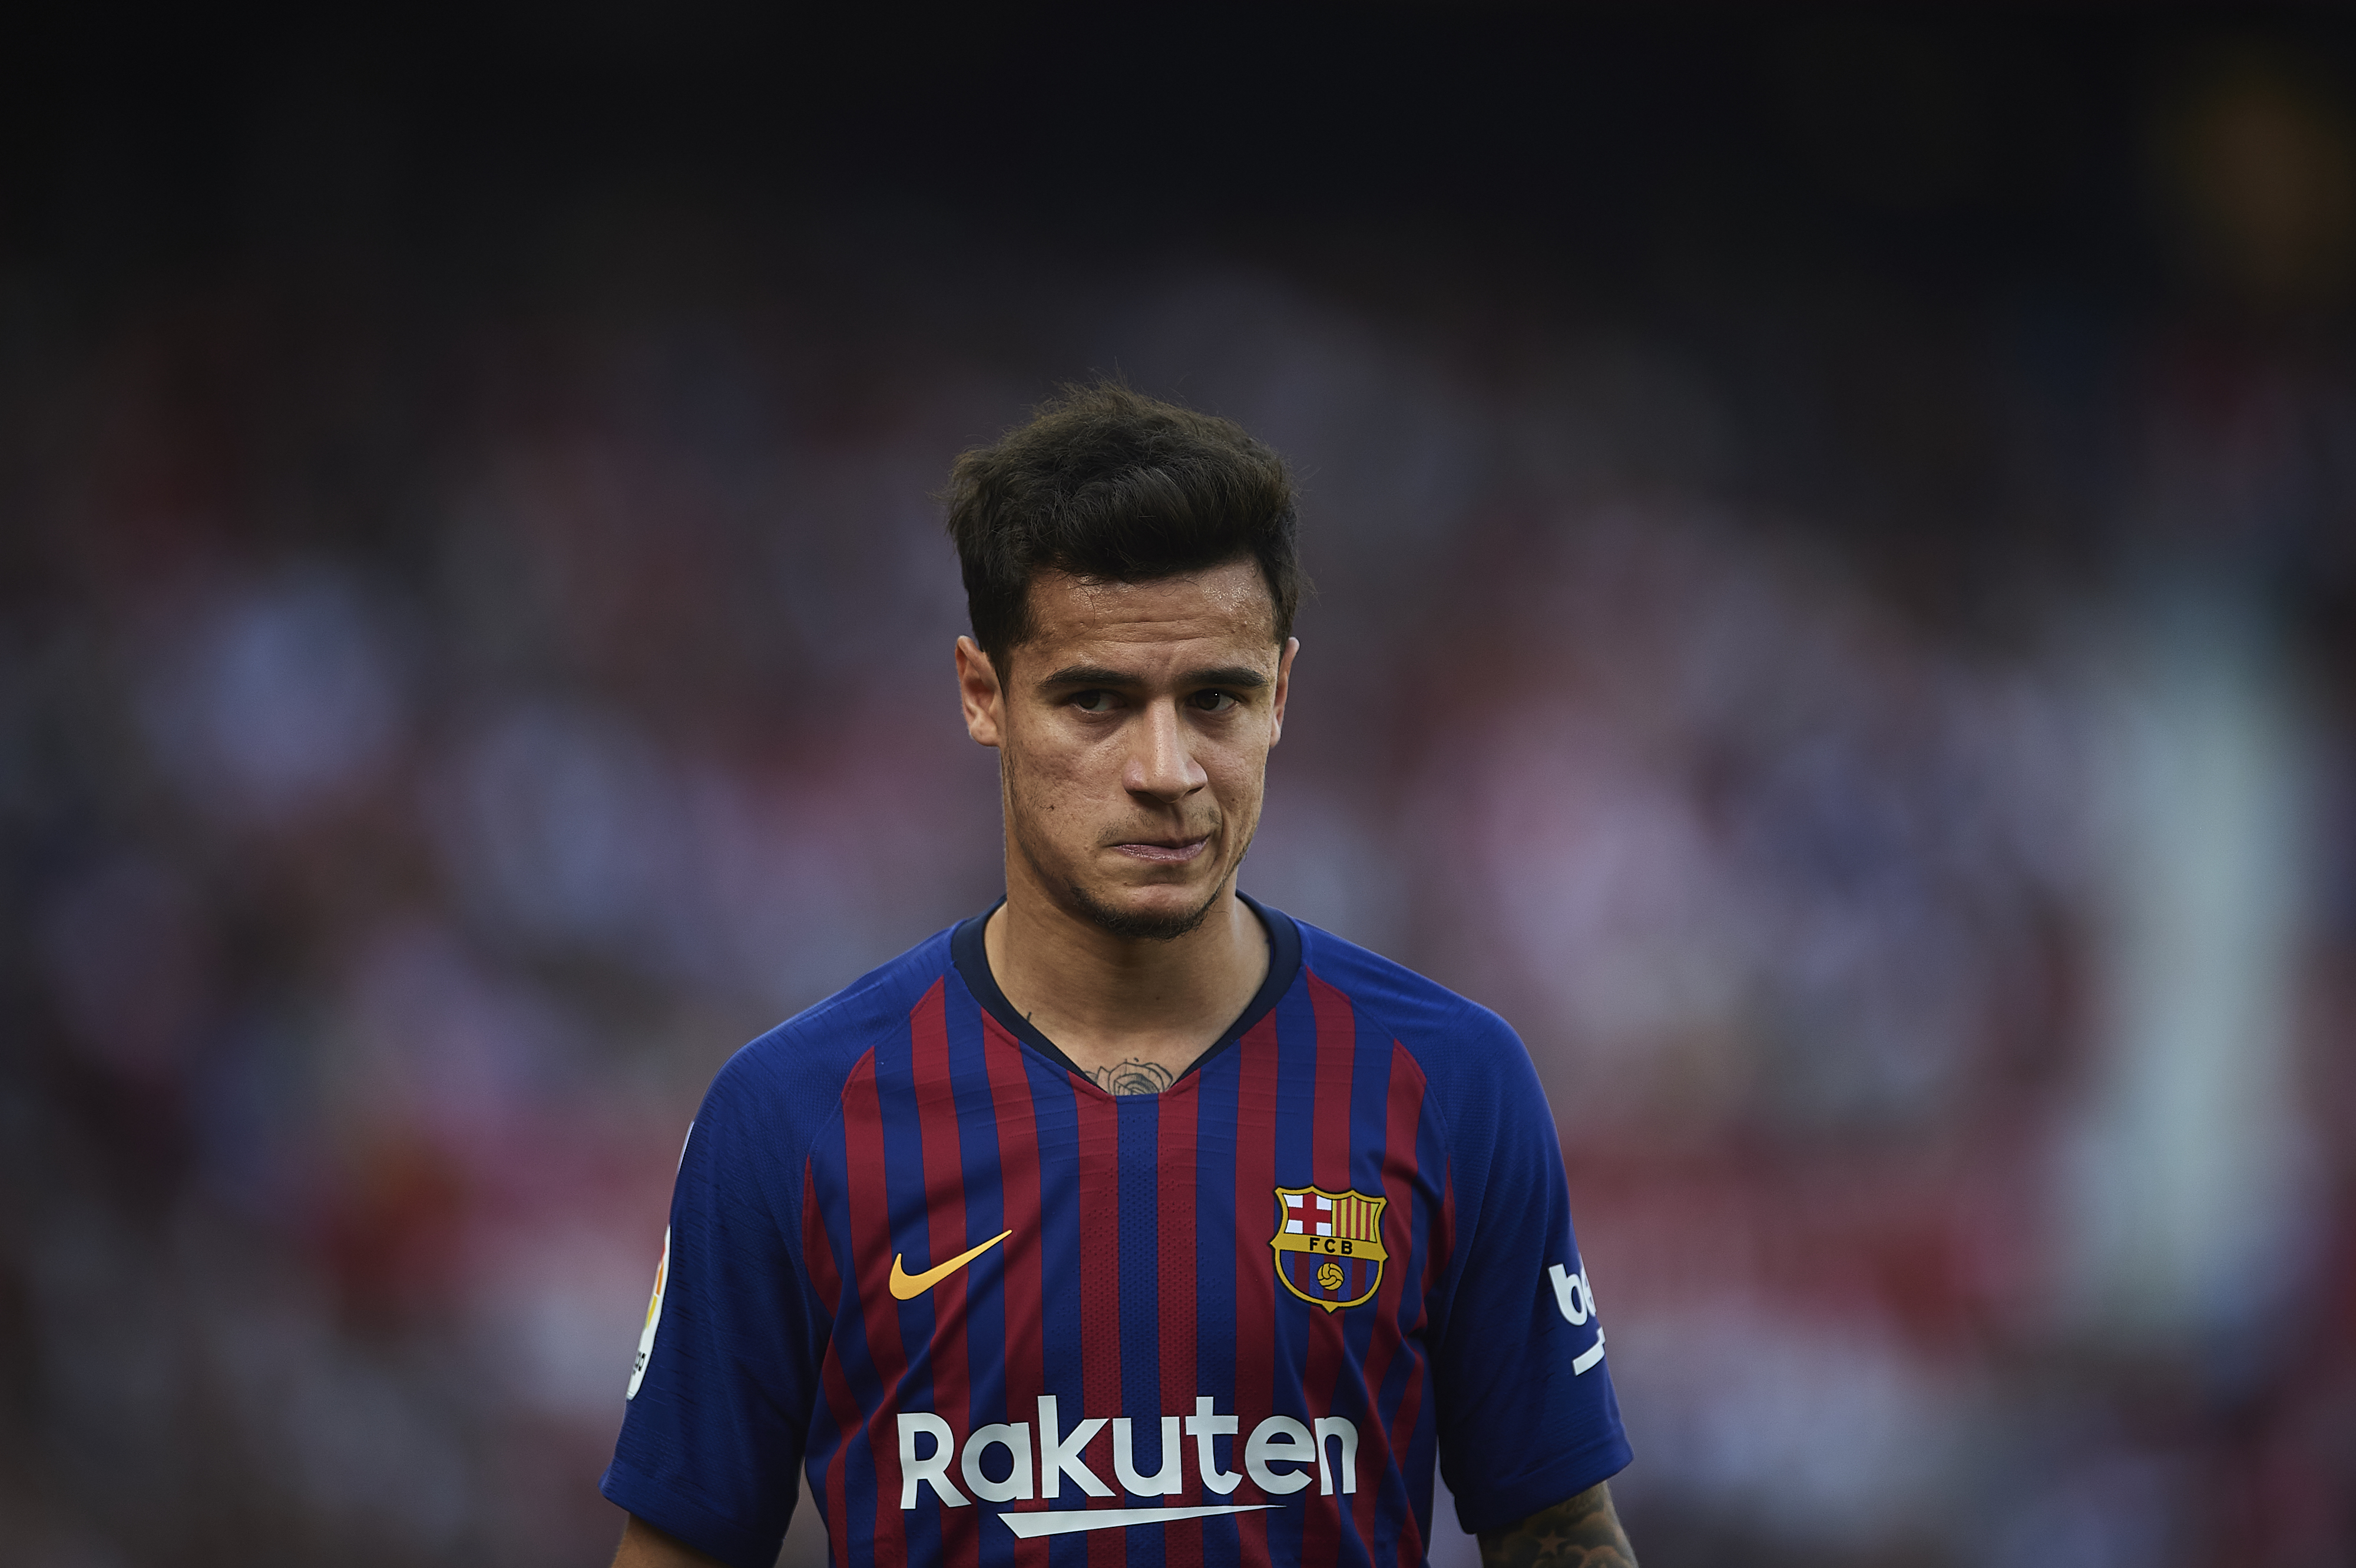 SEVILLE, SPAIN - FEBRUARY 23: Philippe Coutinho of FC Barcelona looks on during the La Liga match between Sevilla FC and FC Barcelona at Estadio Ramon Sanchez Pizjuan on February 23, 2019 in Seville, Spain. (Photo by Aitor Alcalde/Getty Images)